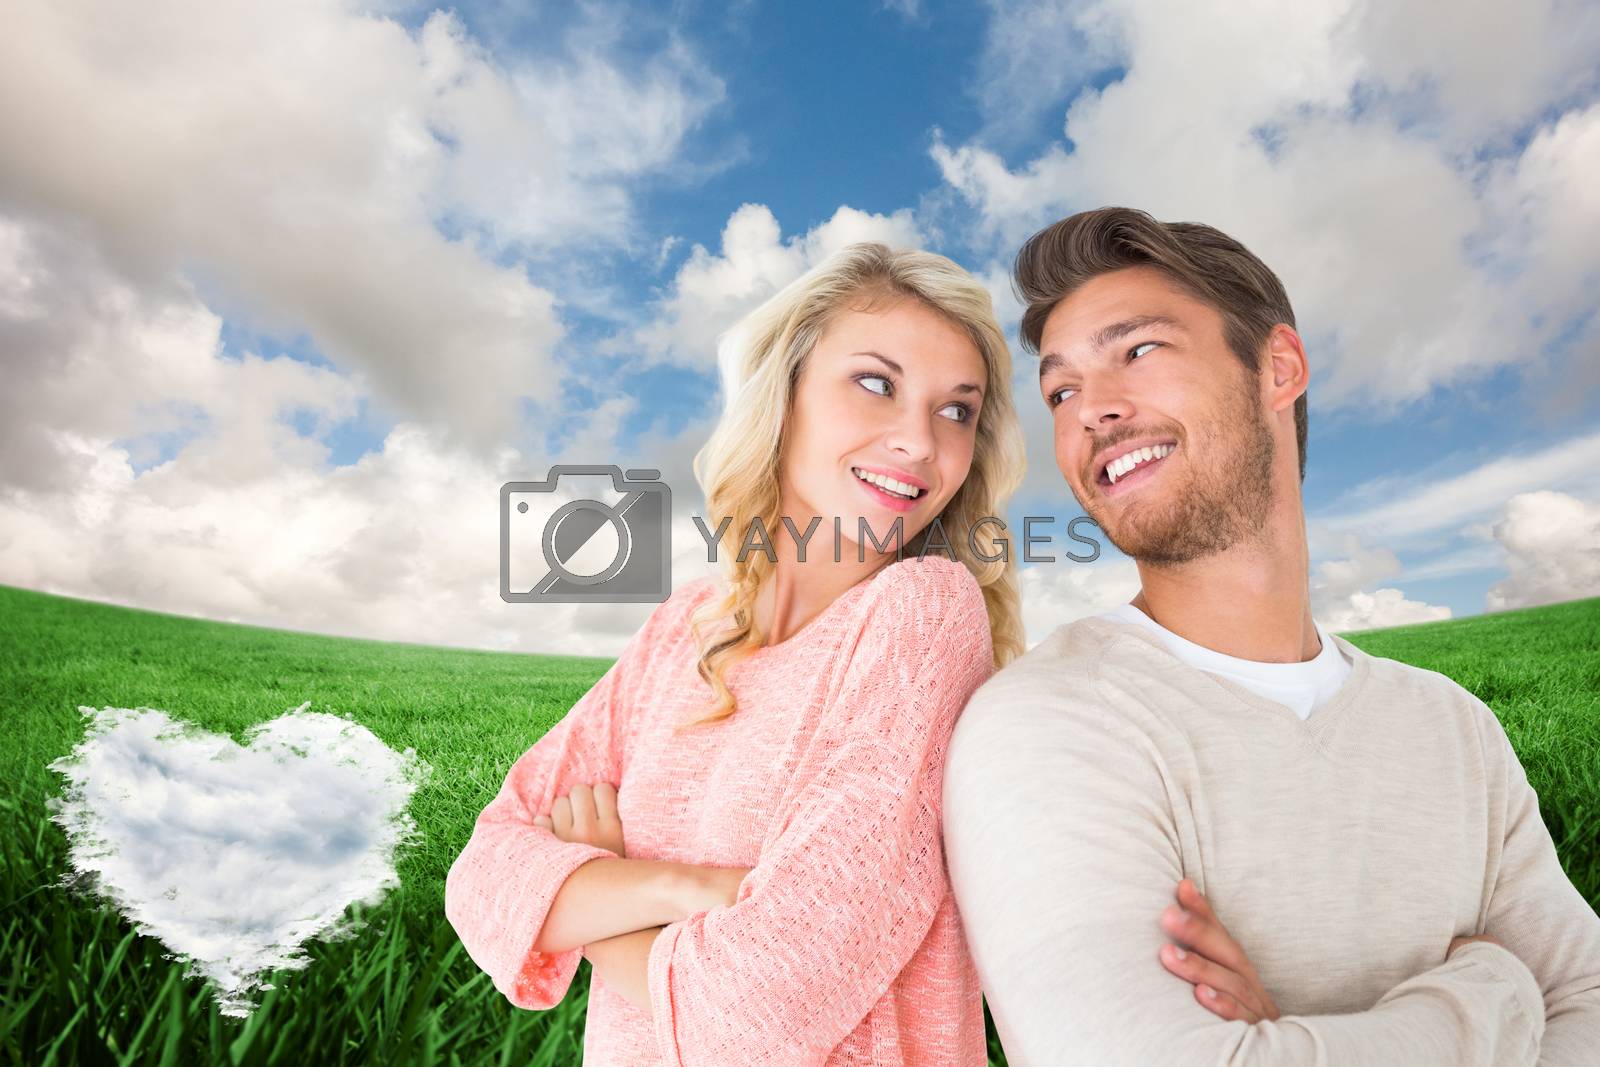 Royalty free image of Composite image of attractive couple smiling with arms crossed by Wavebreakmedia